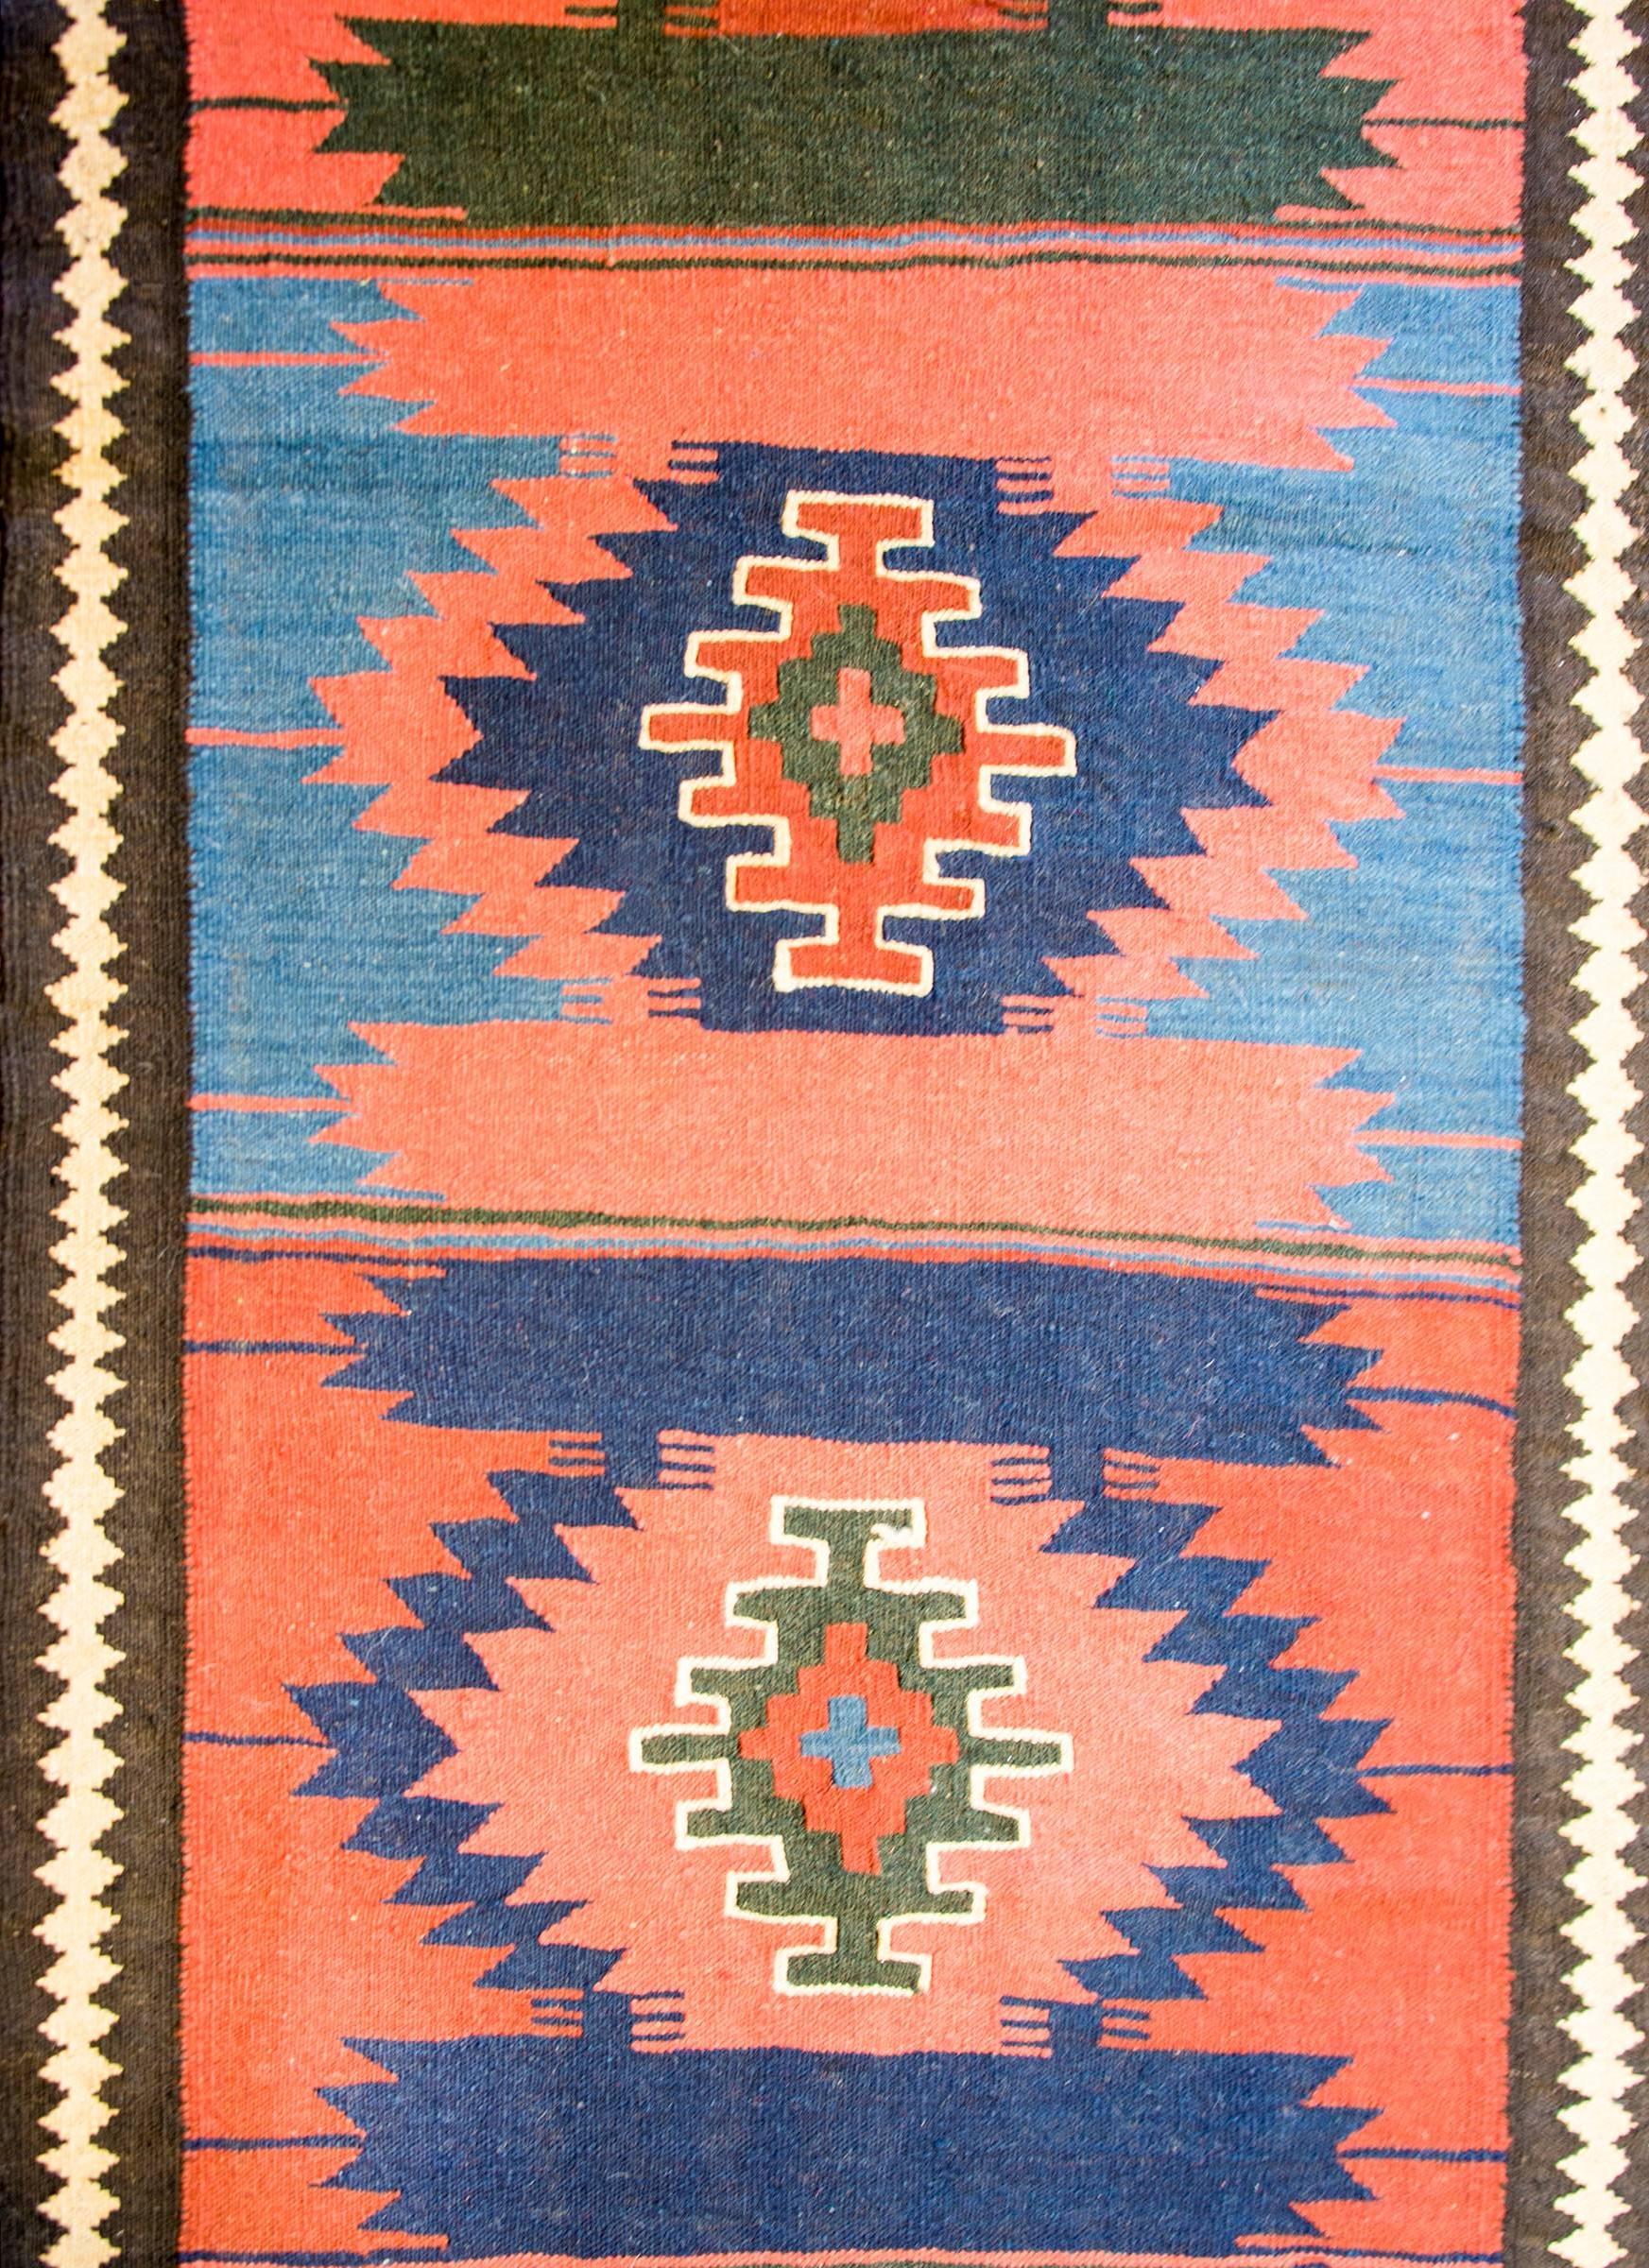 An early 20th century antique Persian Bakhtiari runner with ten diamond medallions woven in crimson, salmon, indigo, and green surrounded by a simple harlequin striped border.